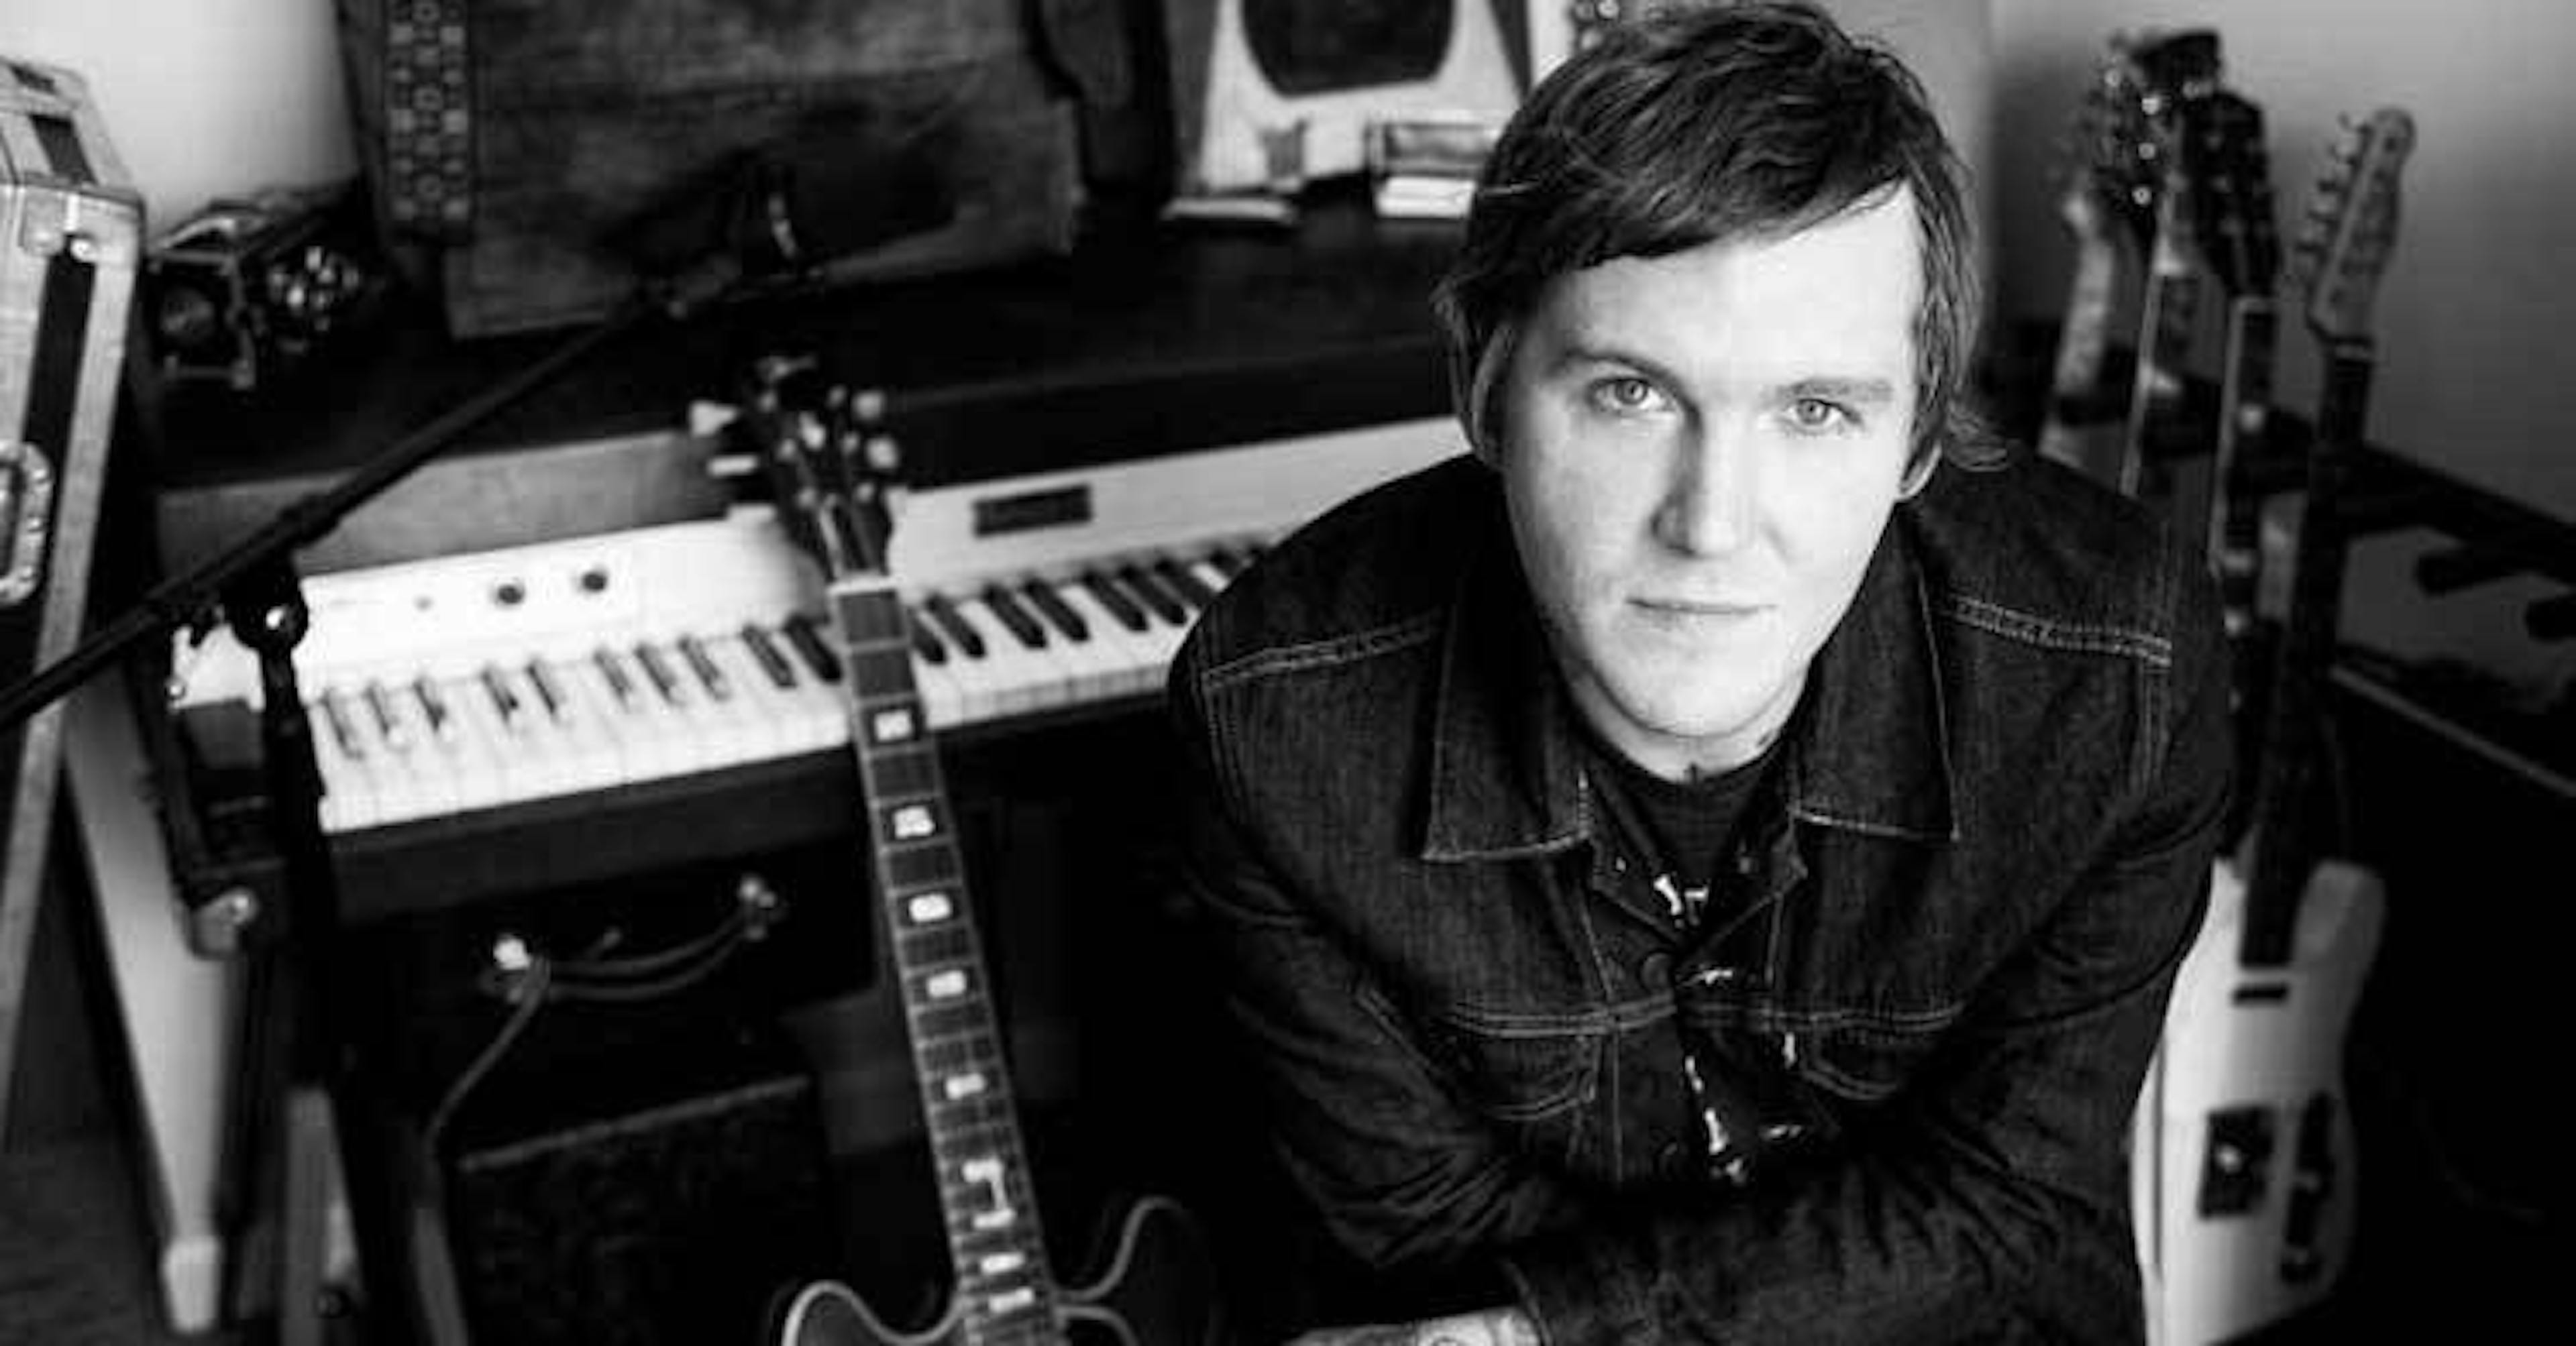 Brian Fallon: “I Wanted To Make A Record That Makes Me Happy”